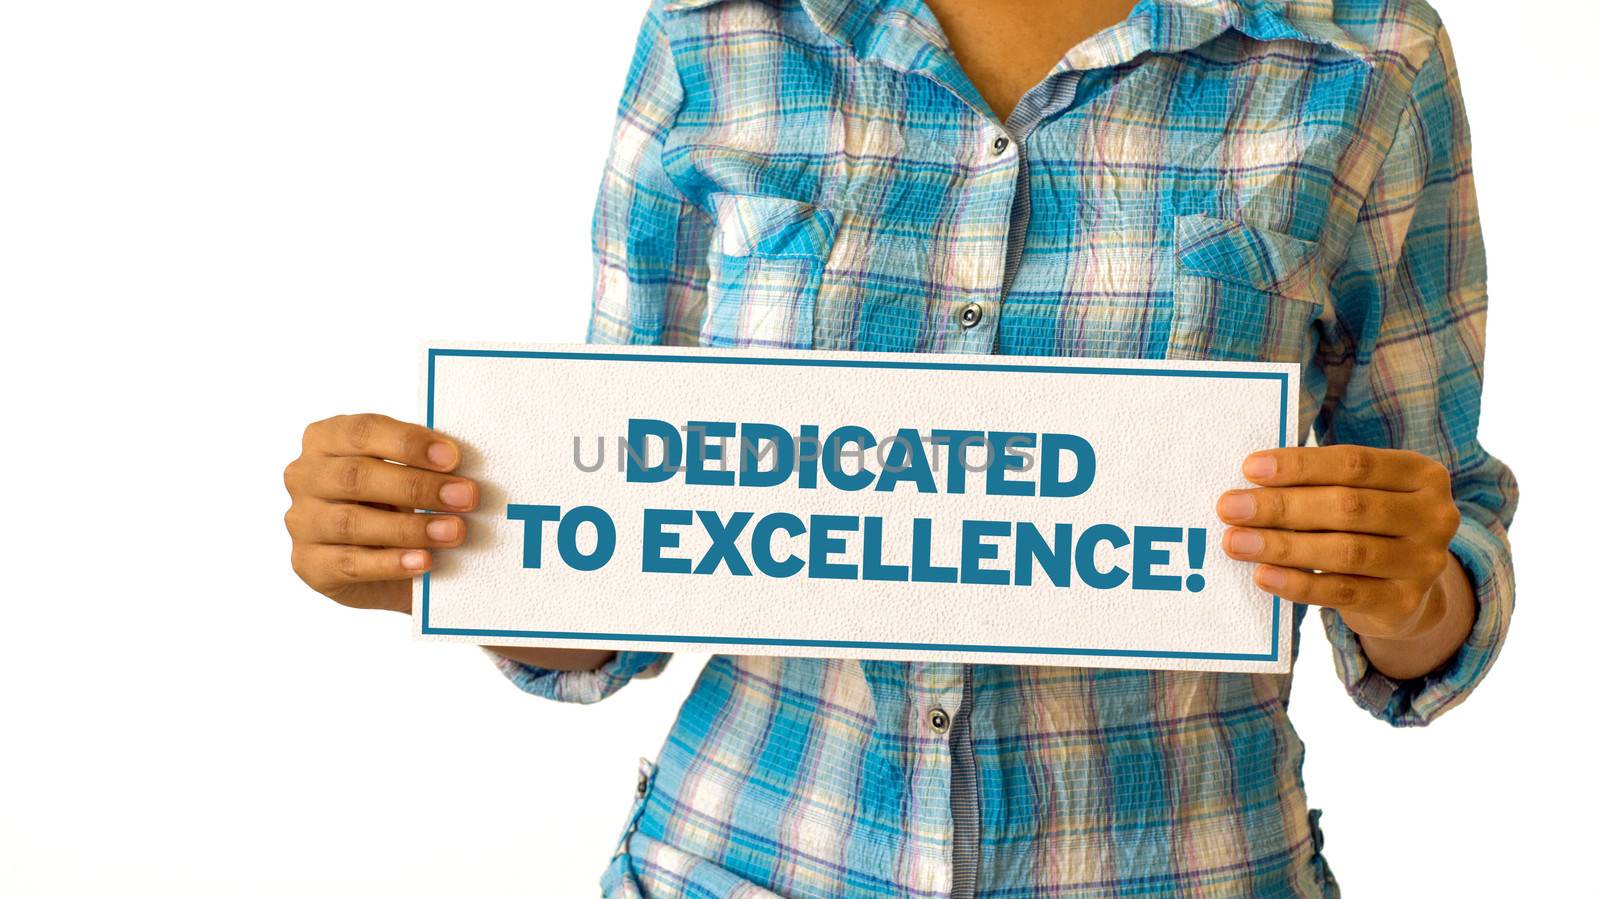 Dedicated To Excellence by kbuntu